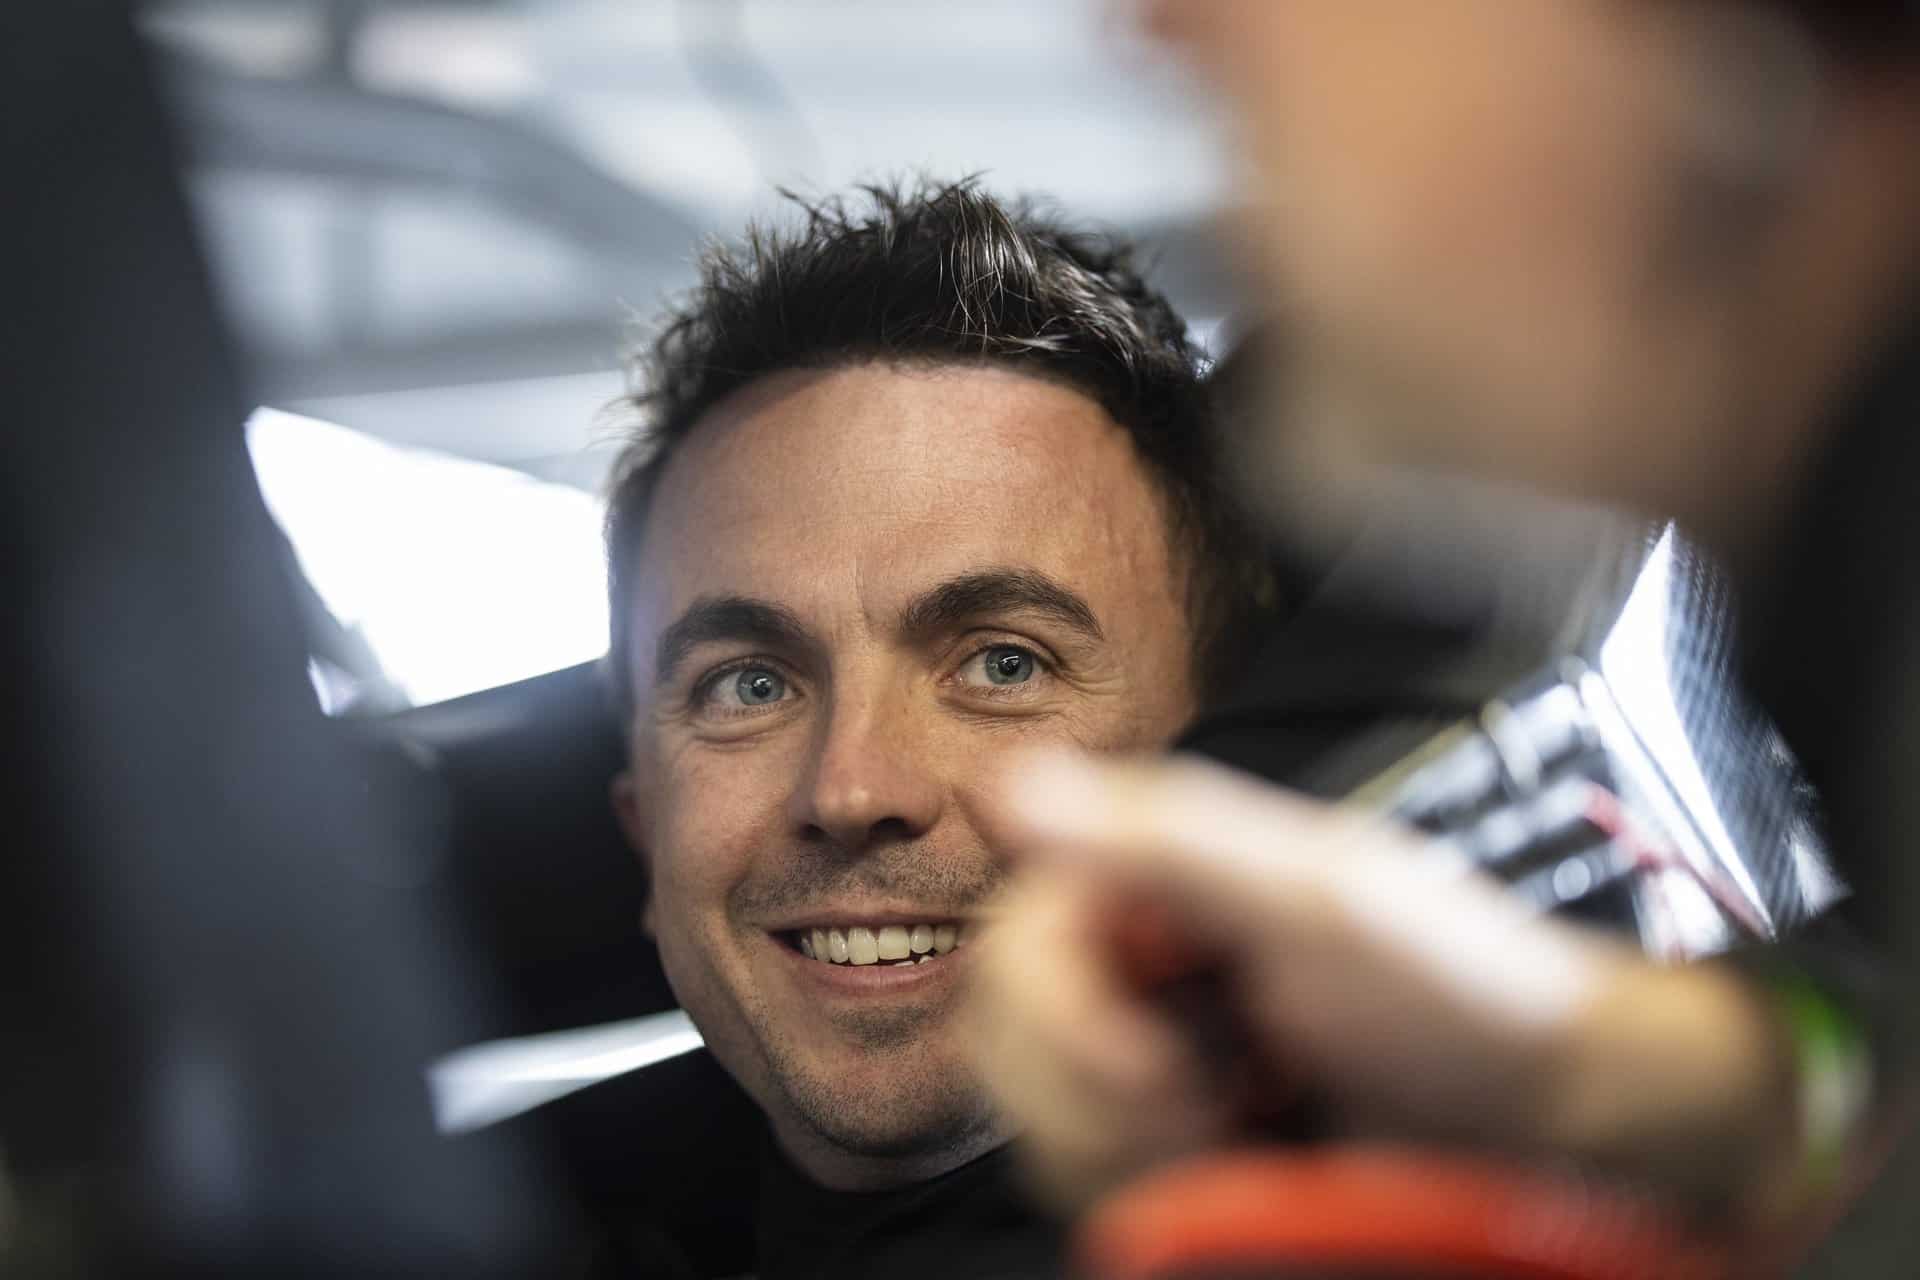 The weight of the connections and memories of the 2001 daytona 500 have left an impact on arca menards series driver frankie muniz.